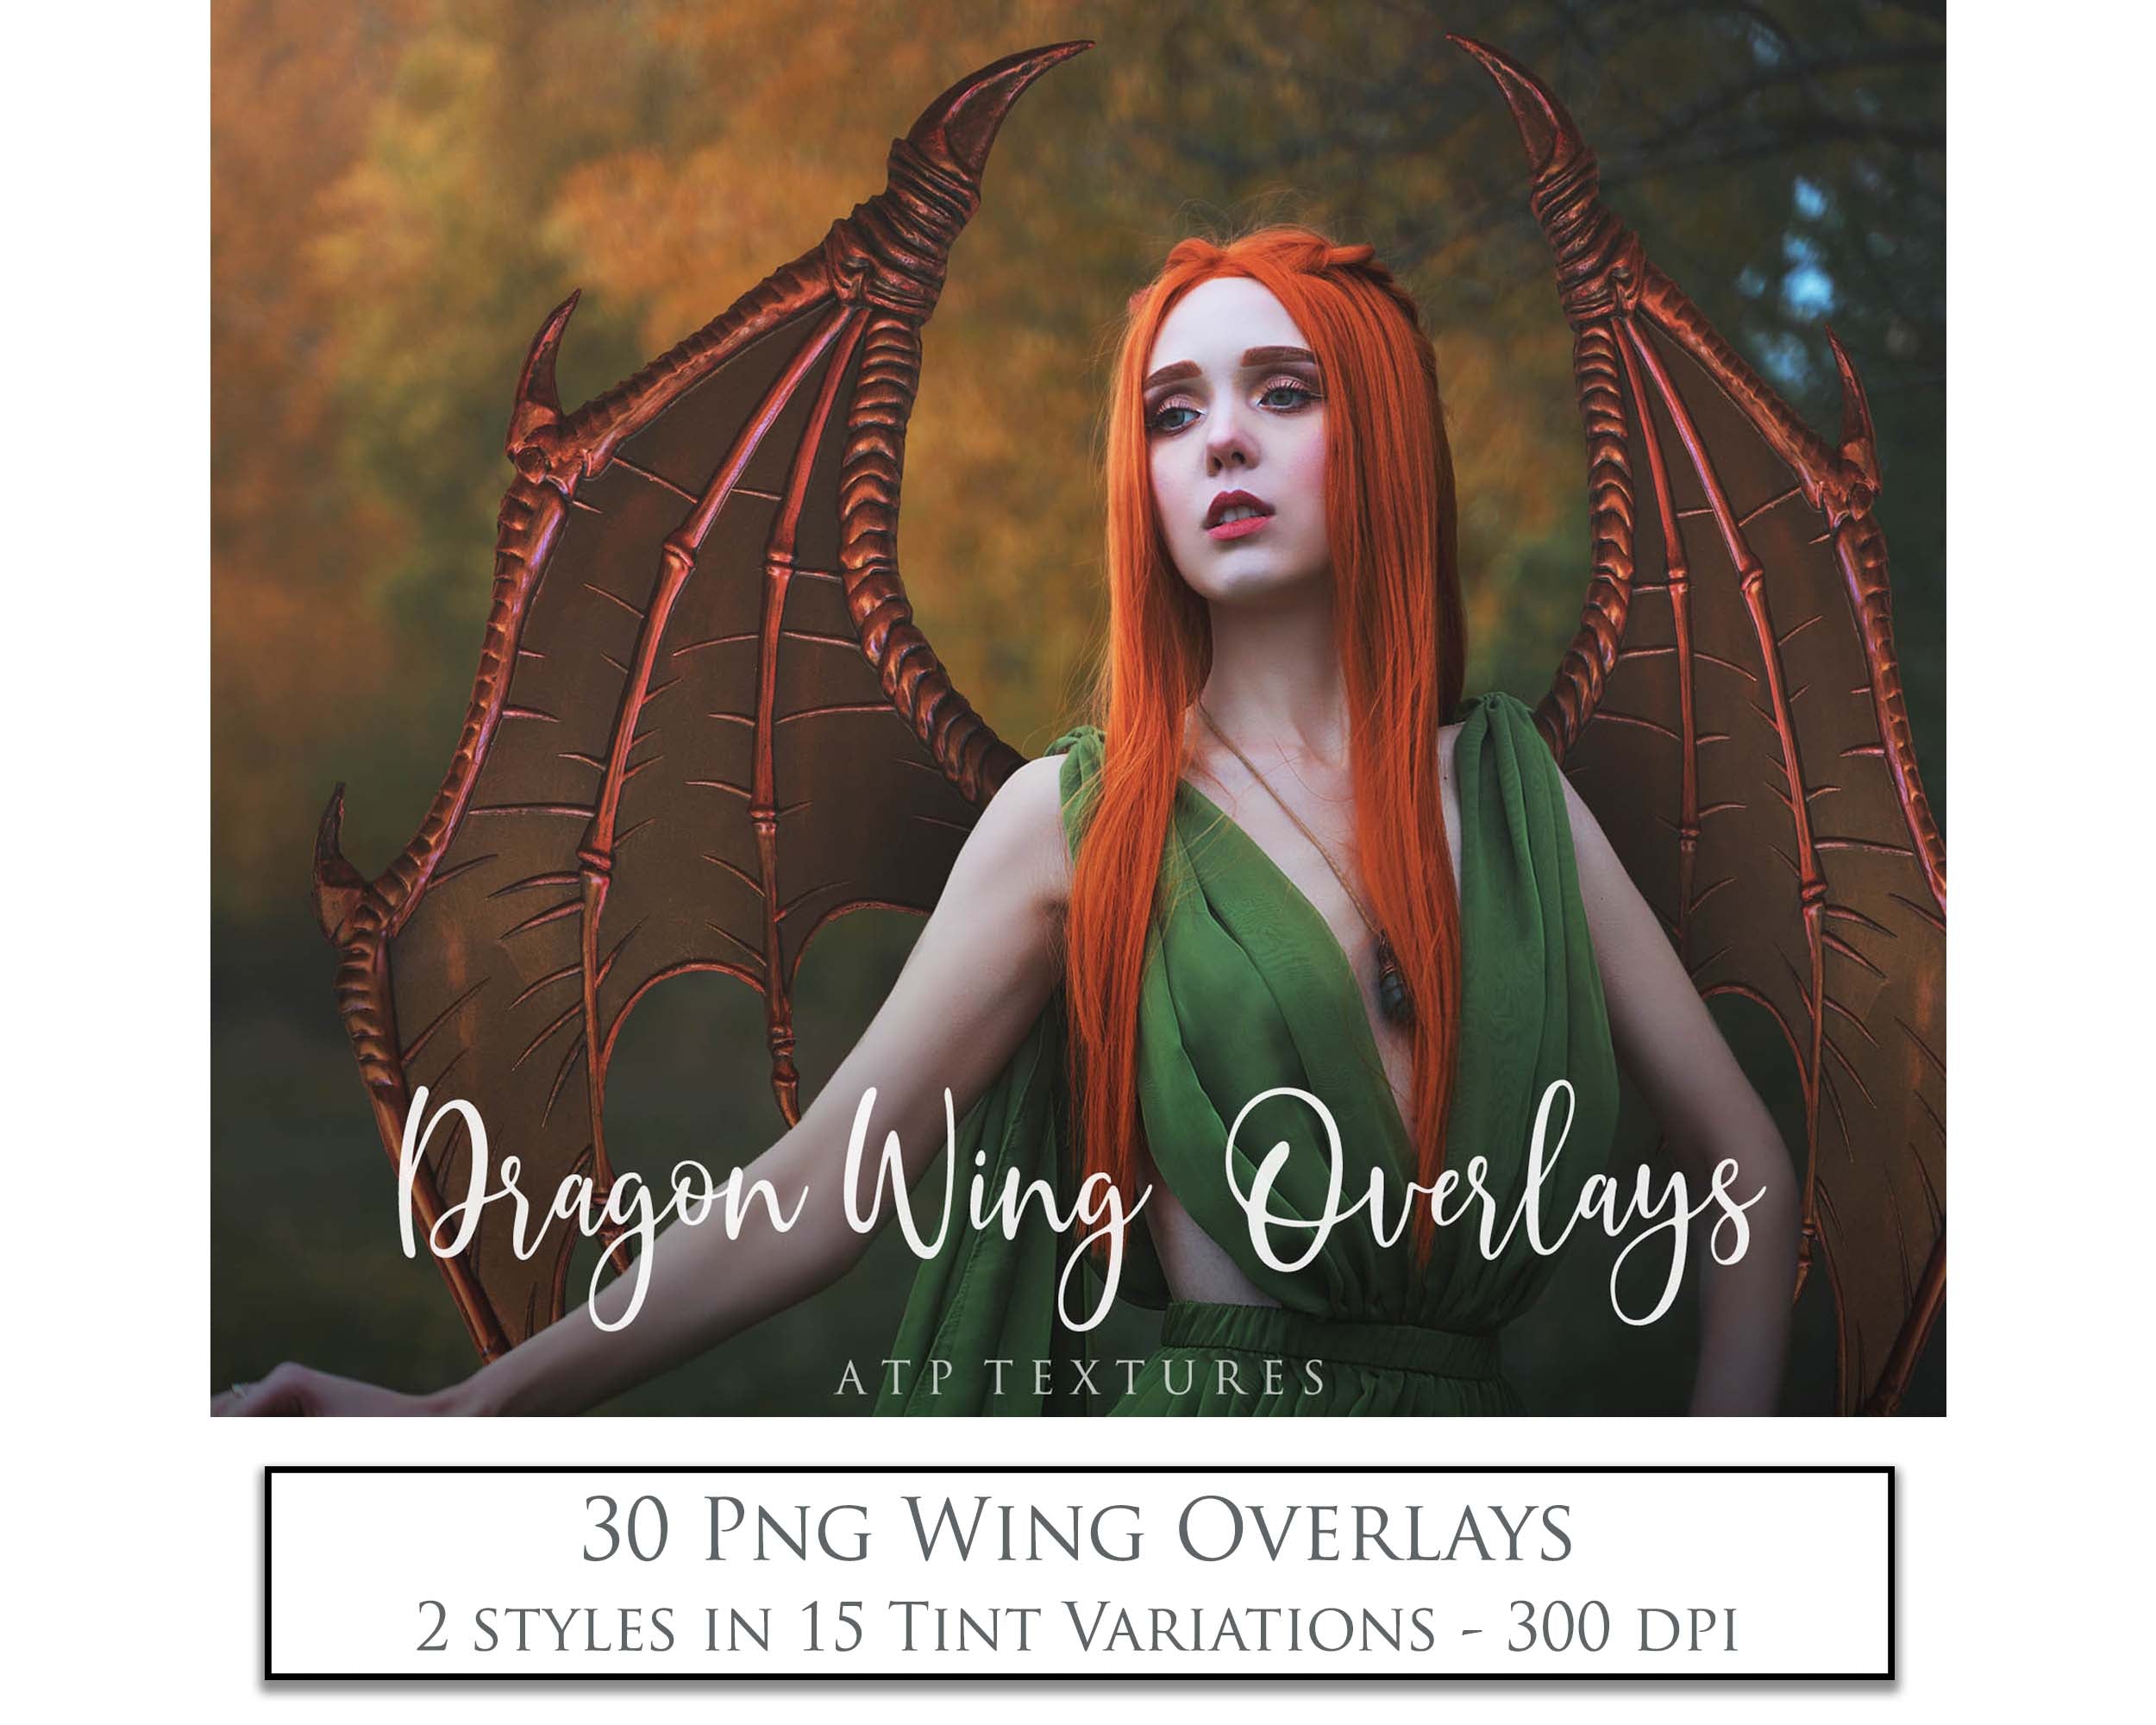 Dragon wing overlays for photography edits. High resolution fairy wings. Graphic assets and add ons for photos. ATP Textures designs.